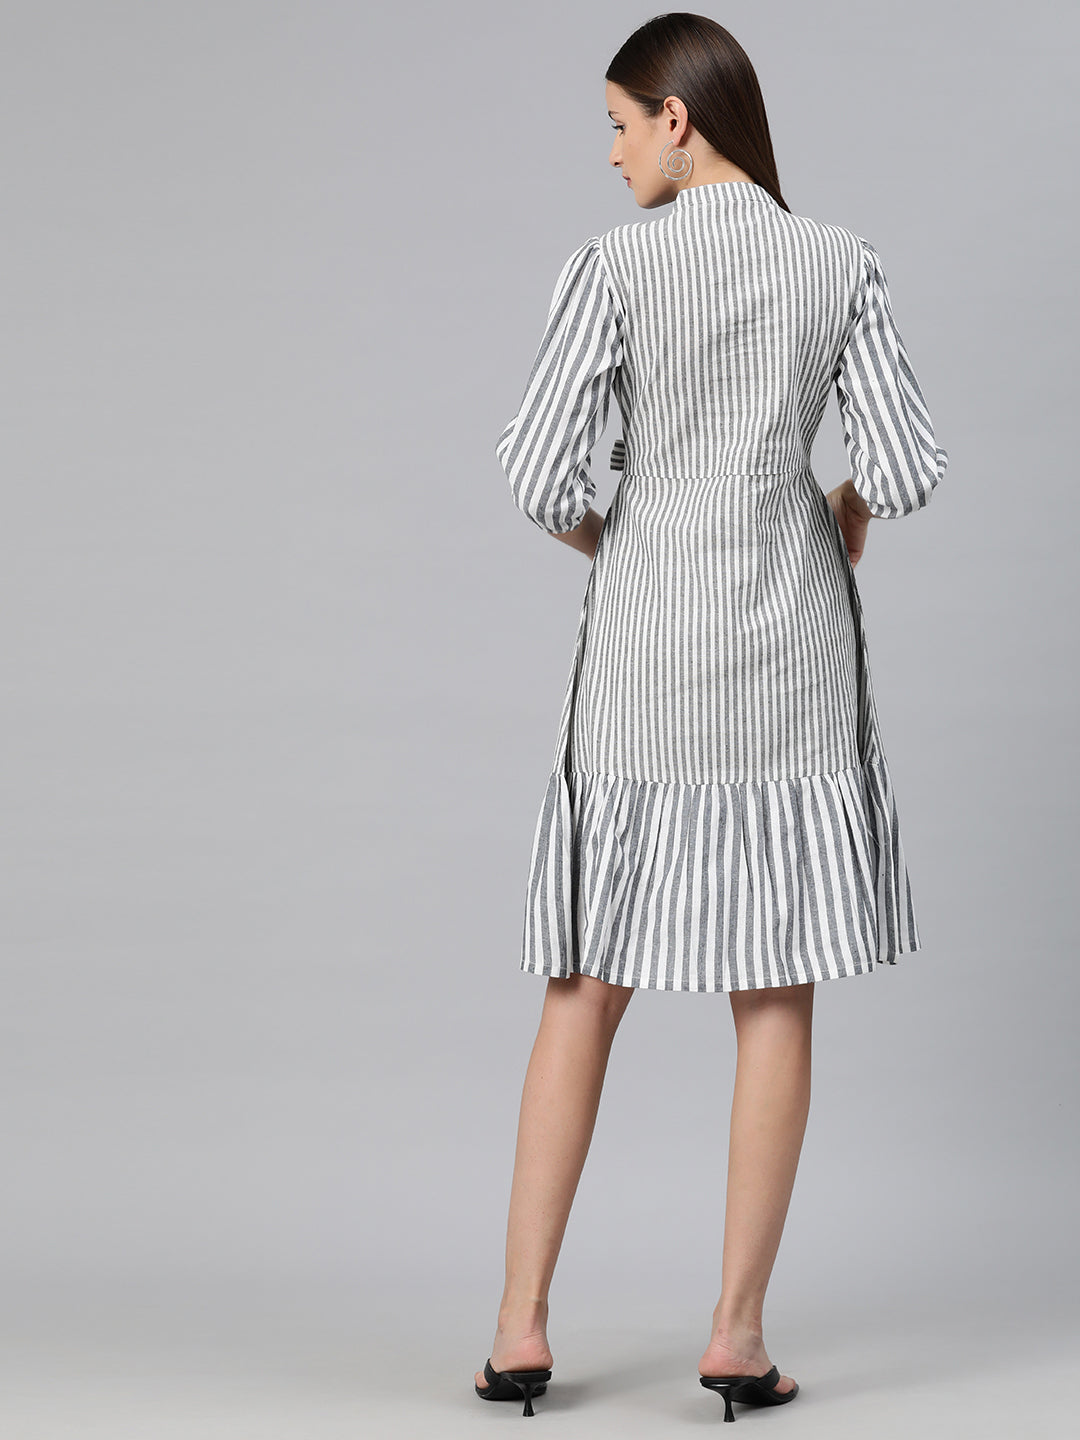 Cottinfab Women Striped Puff Sleeves A-Line Dress with Tie-Up Detail